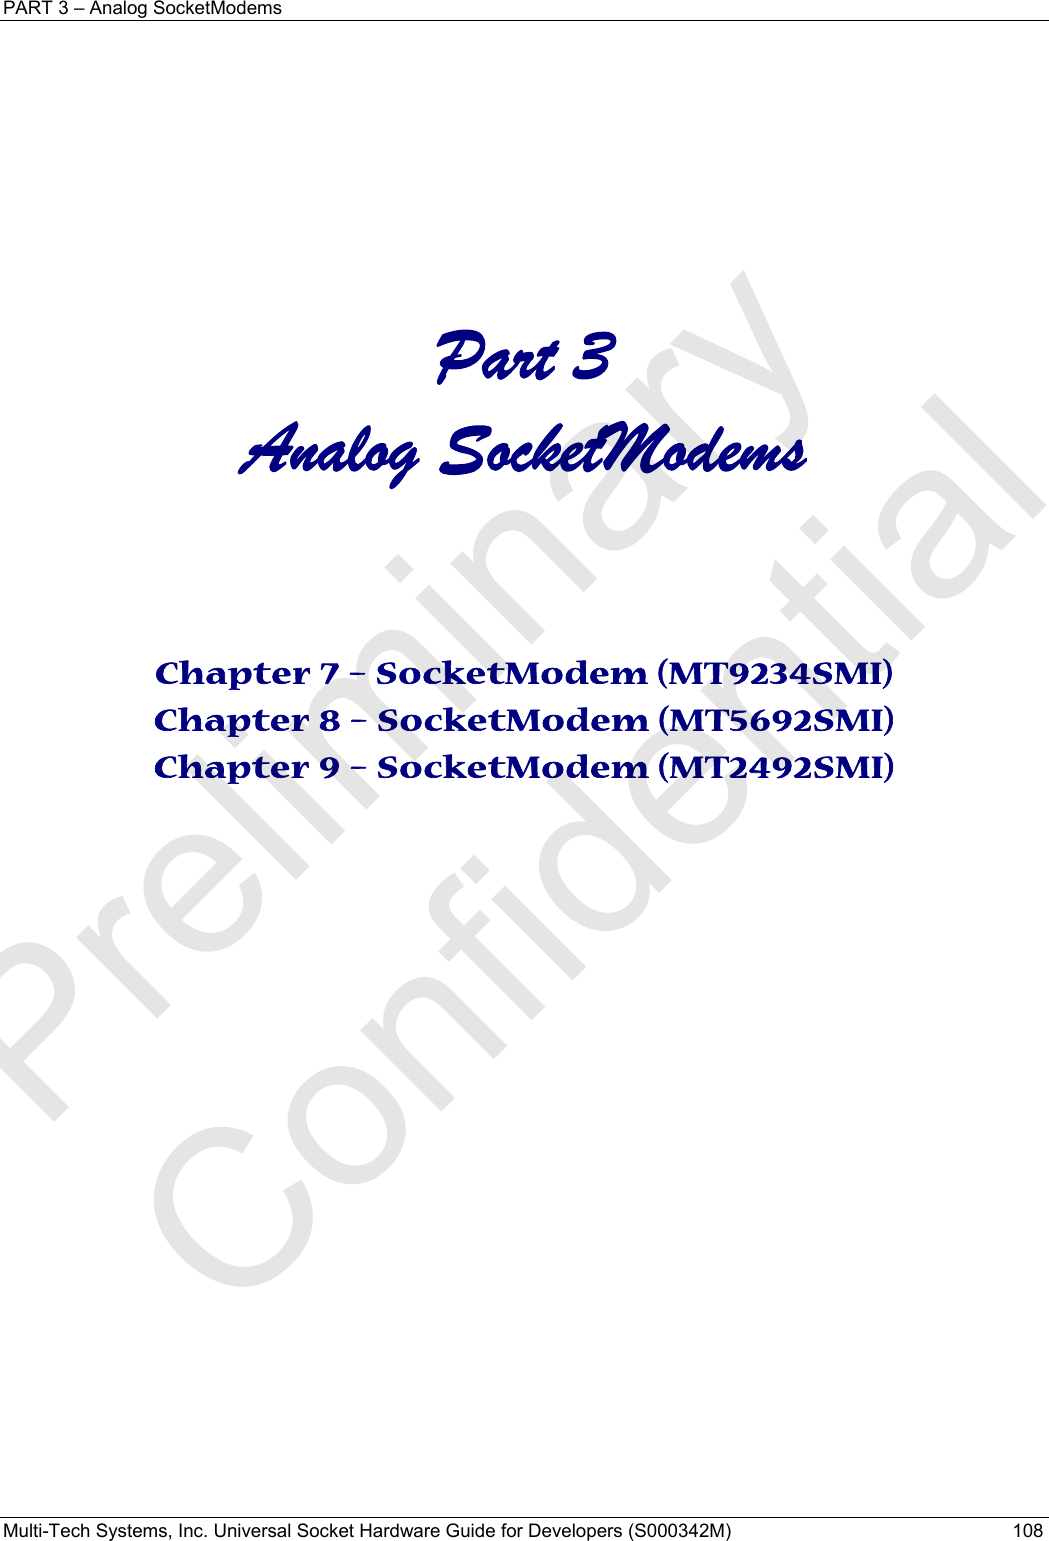 PART 3 – Analog SocketModems Multi-Tech Systems, Inc. Universal Socket Hardware Guide for Developers (S000342M)  108     Part 3 Analog SocketModems   Chapter 7 – SocketModem (MT9234SMI) Chapter 8 – SocketModem (MT5692SMI) Chapter 9 – SocketModem (MT2492SMI)    Preliminary  Confidential